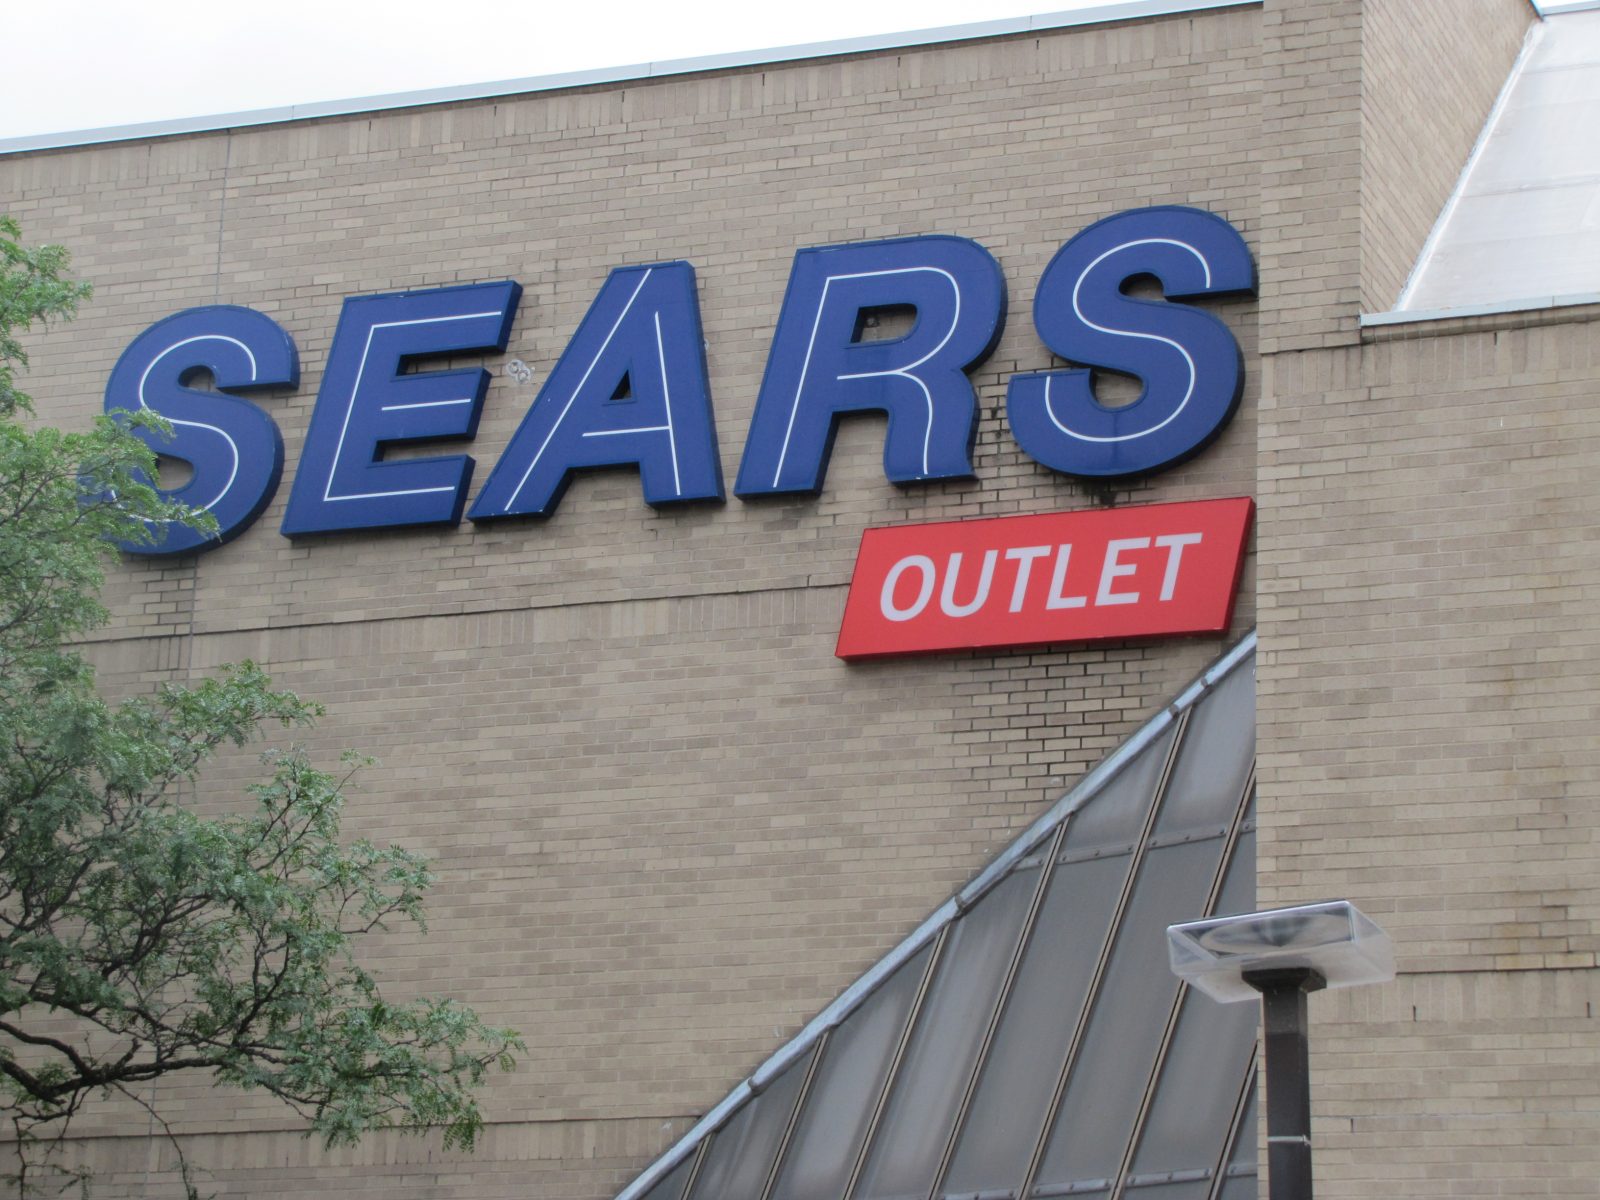 Former Sears employee asks MP to help with pensions